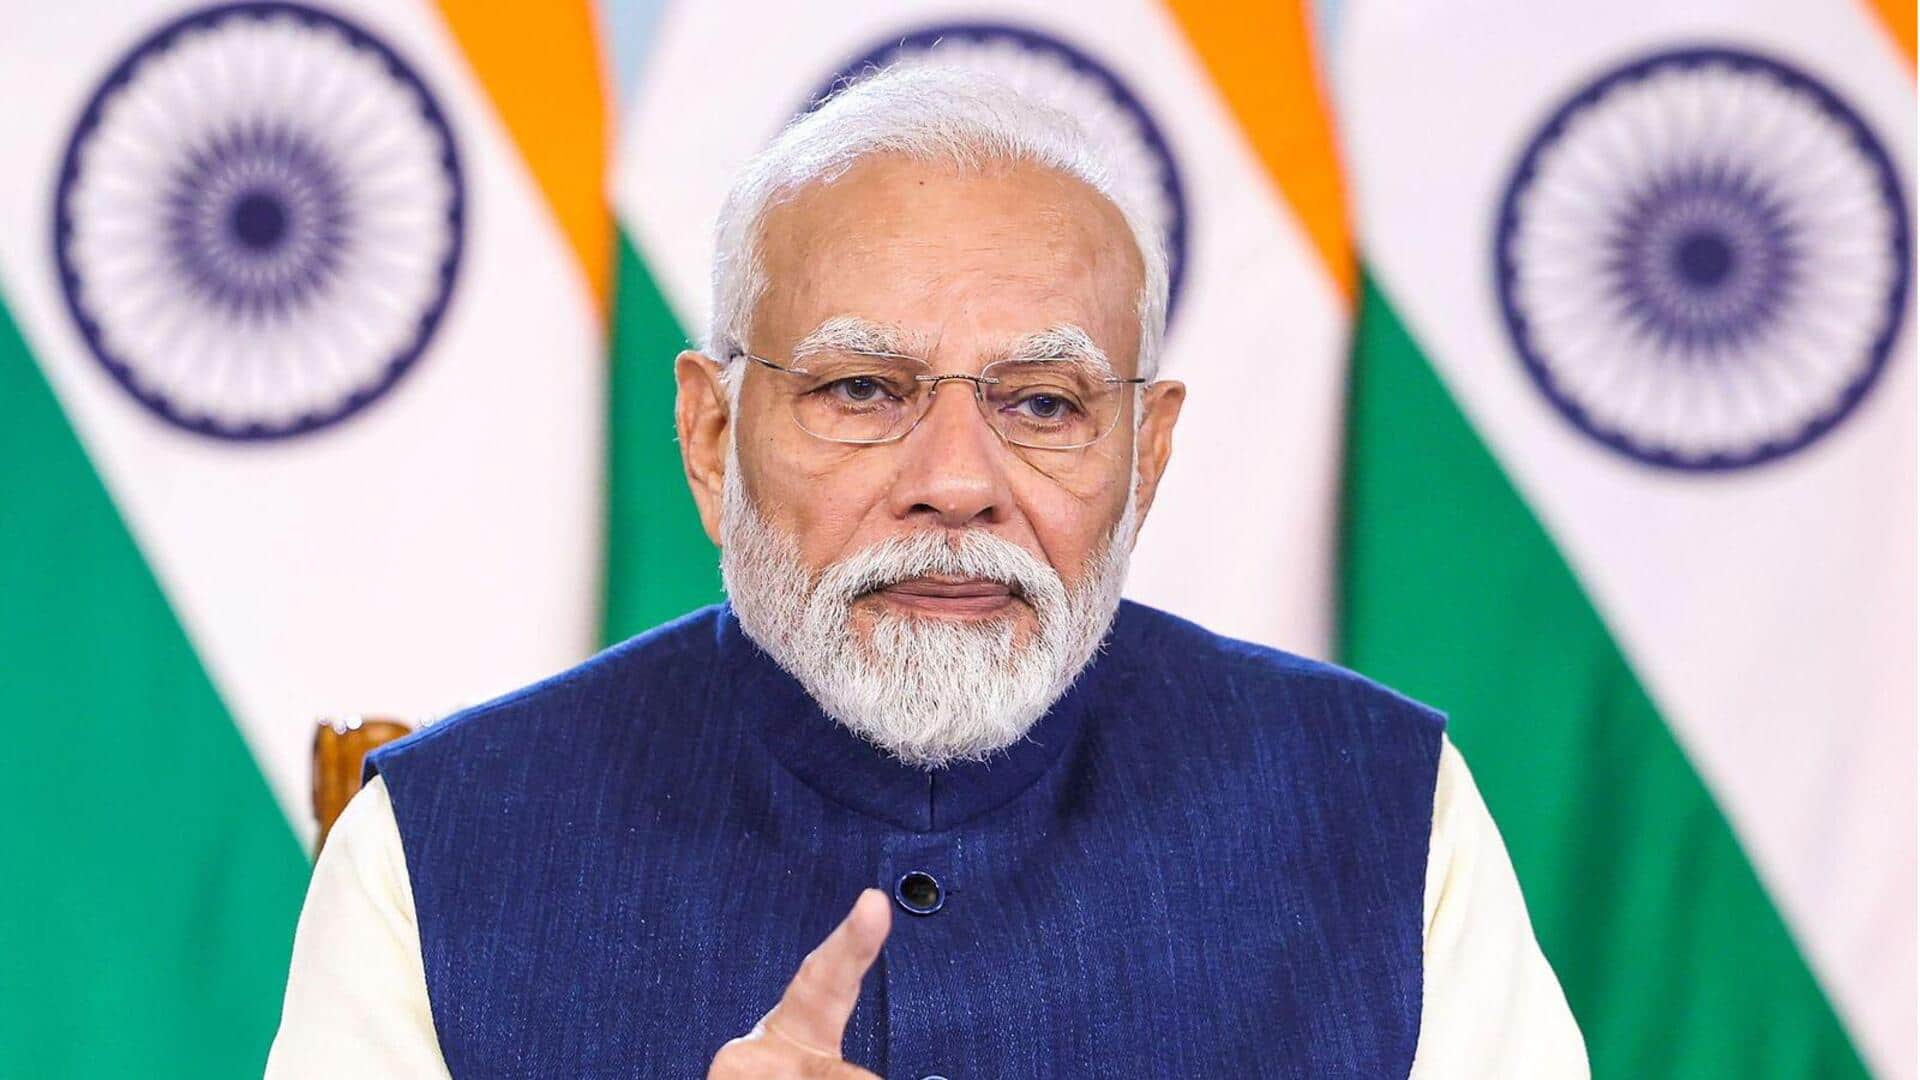 PM Modi calls for joint regulation on use of AI